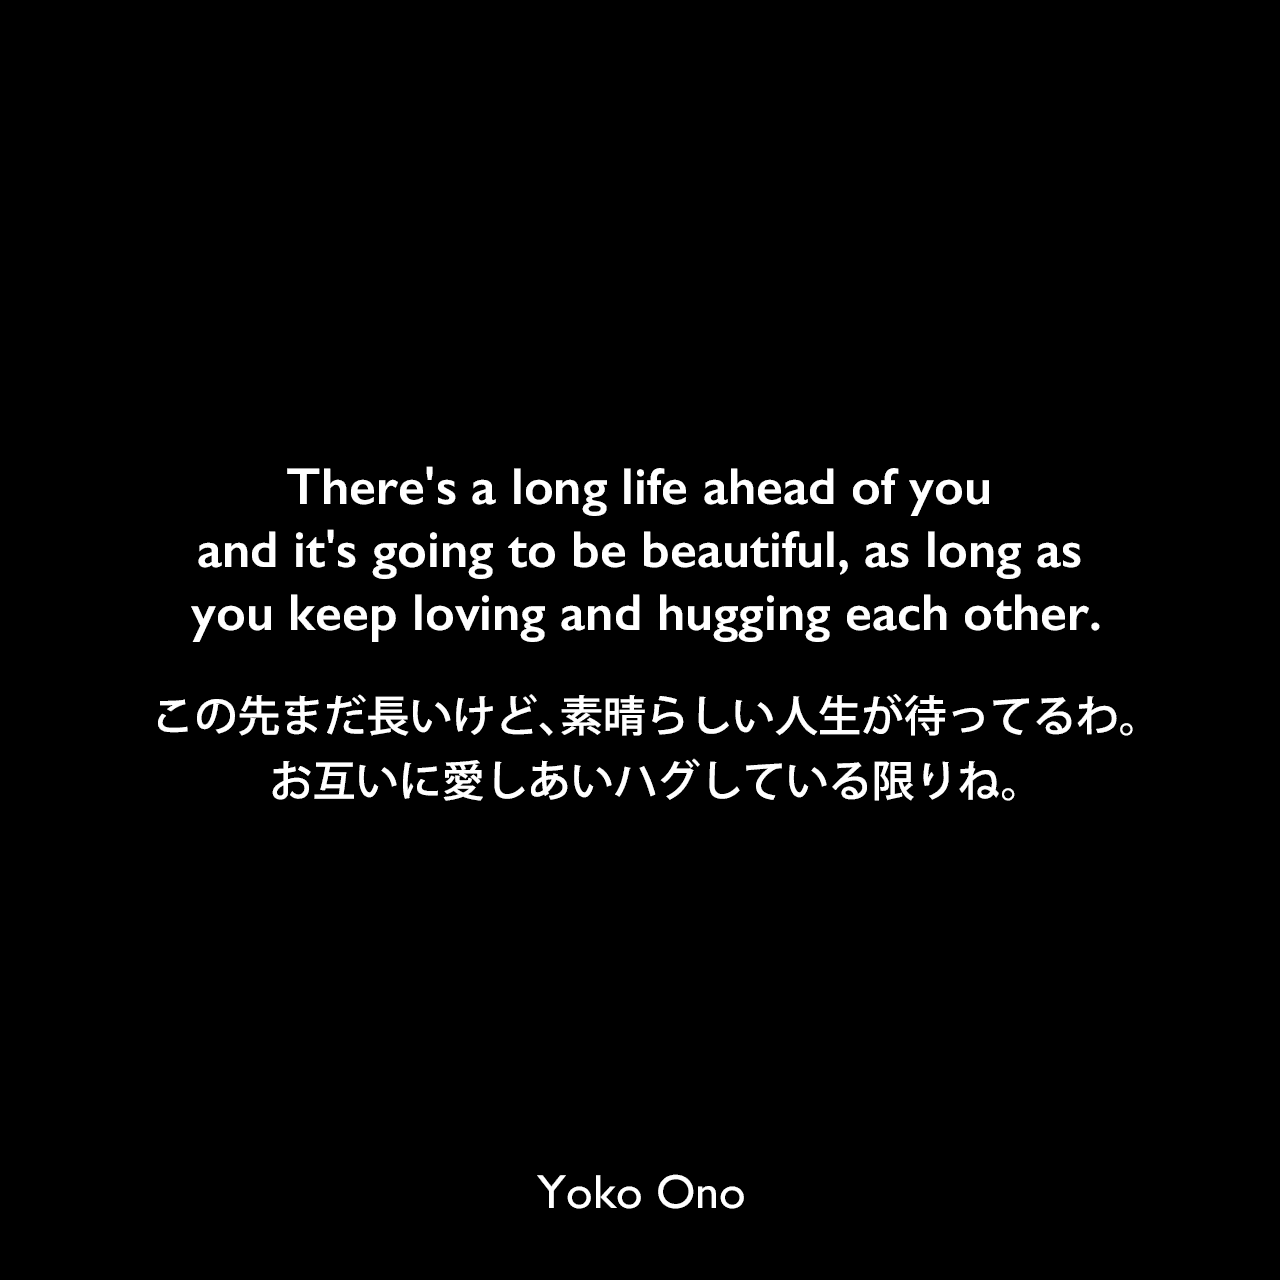 There's a long life ahead of you and it's going to be beautiful, as long as you keep loving and hugging each other.この先まだ長いけど、素晴らしい人生が待ってるわ。お互いに愛しあいハグしている限りね。Yoko Ono